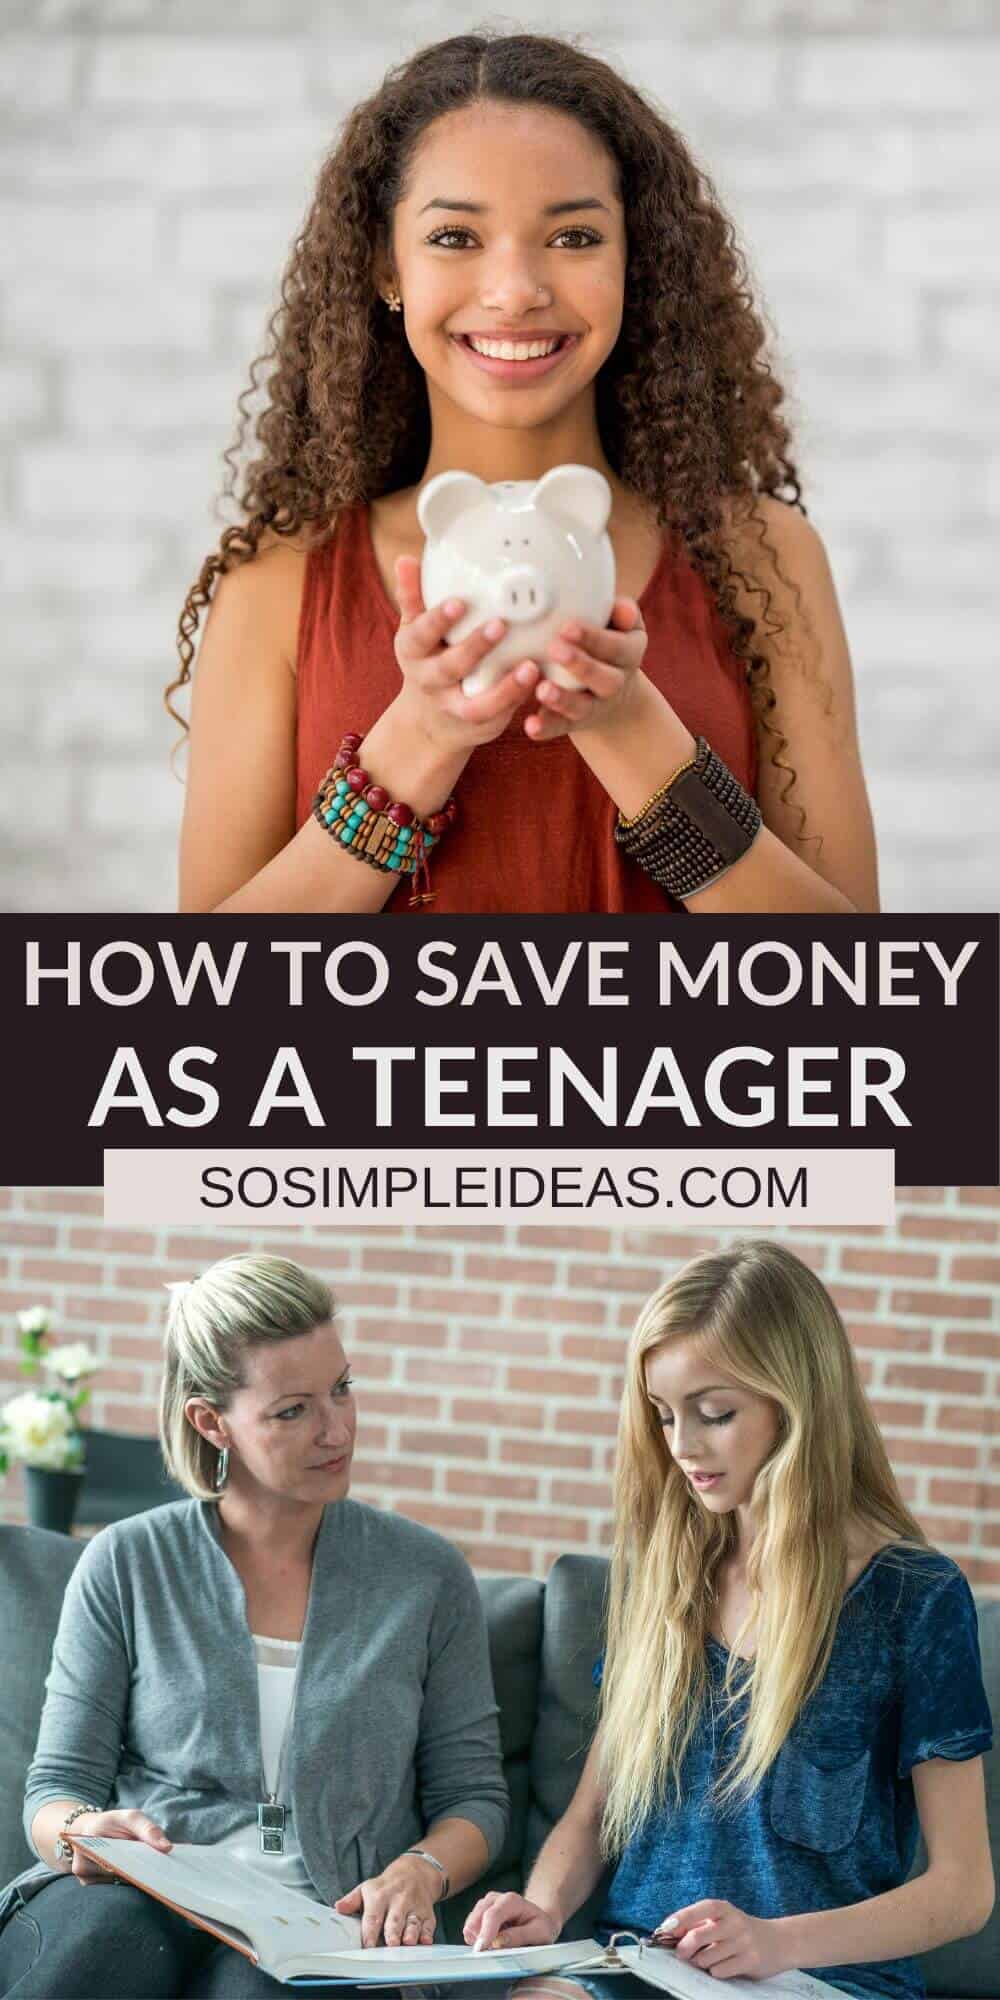 how to save money as a teenager pinterest image.